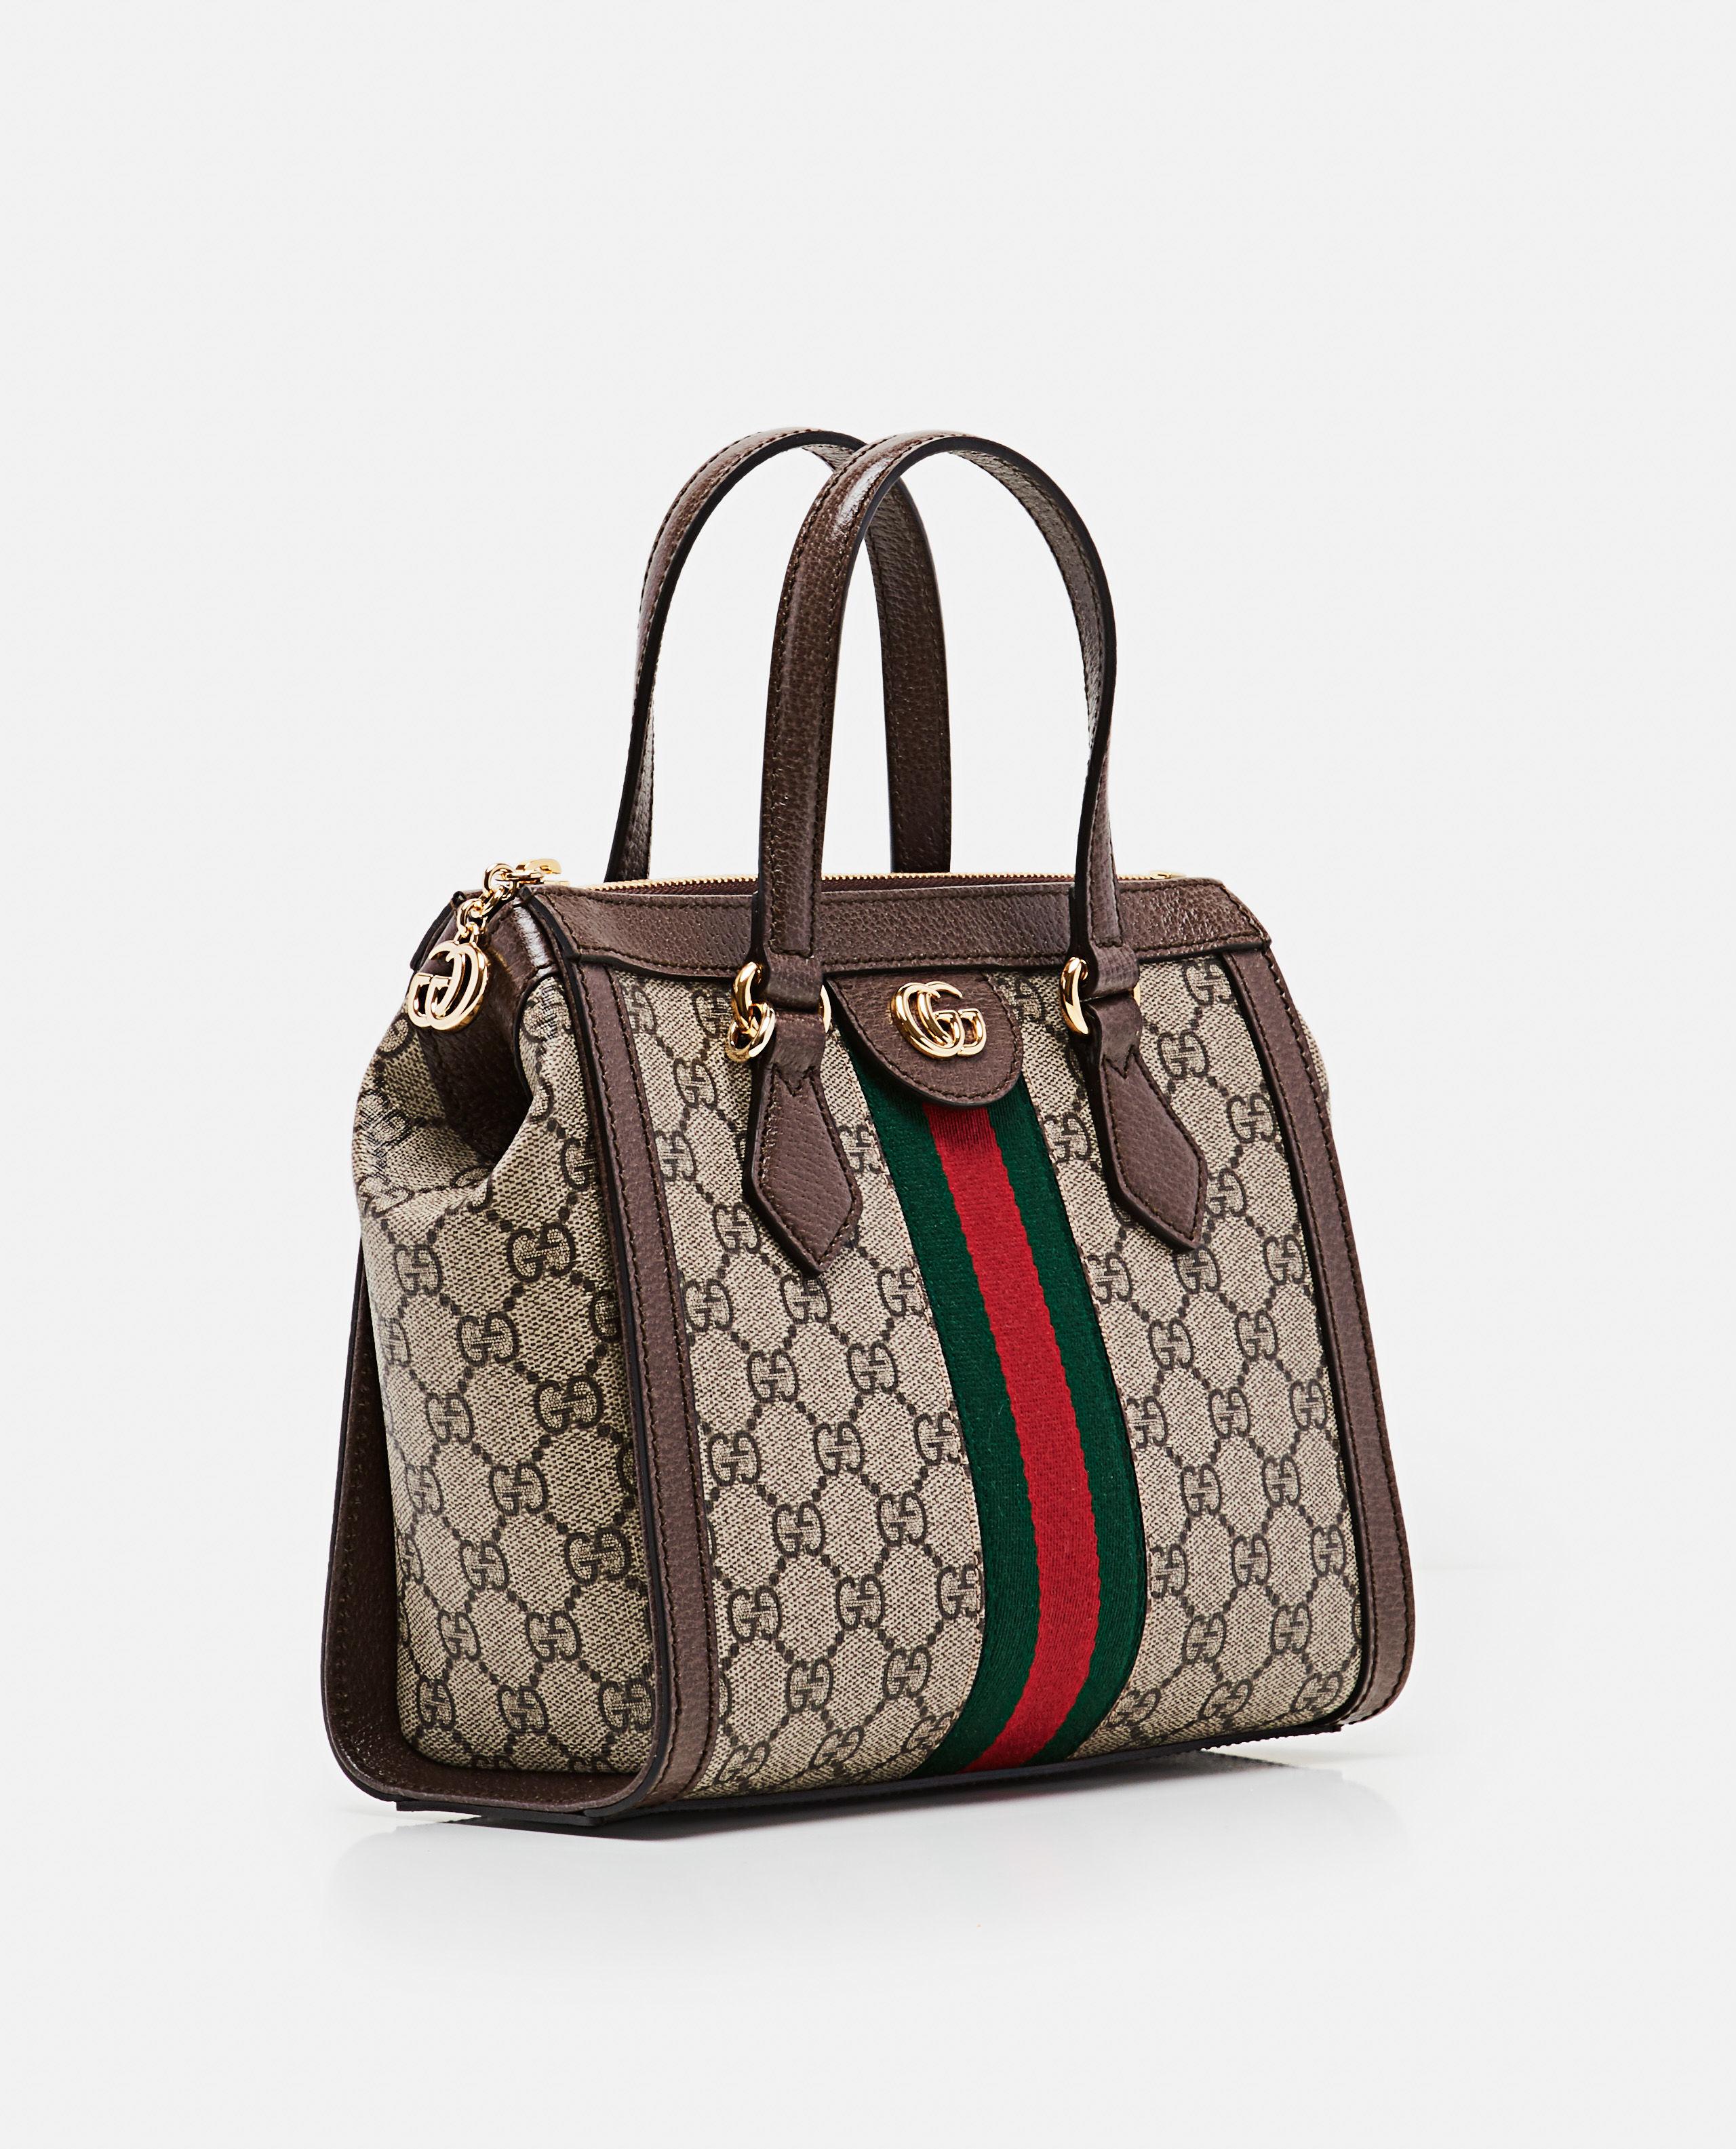 Gucci Ophidia Small Gg Tote Bag in Brown - Lyst